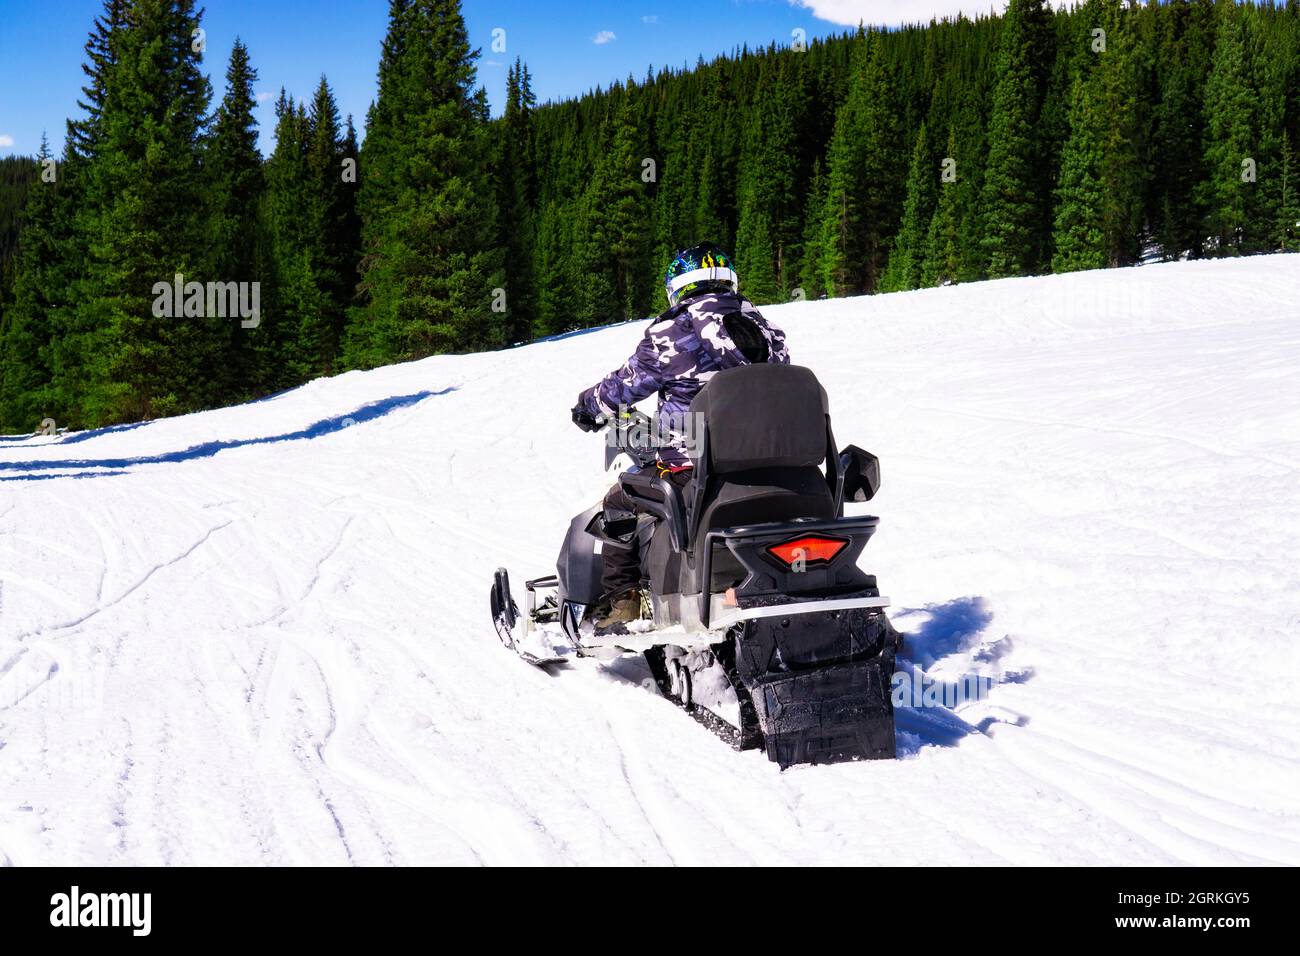 Man On Tour Rent Snow Mobile In Winter Mountains Pine Forest Stock Photo